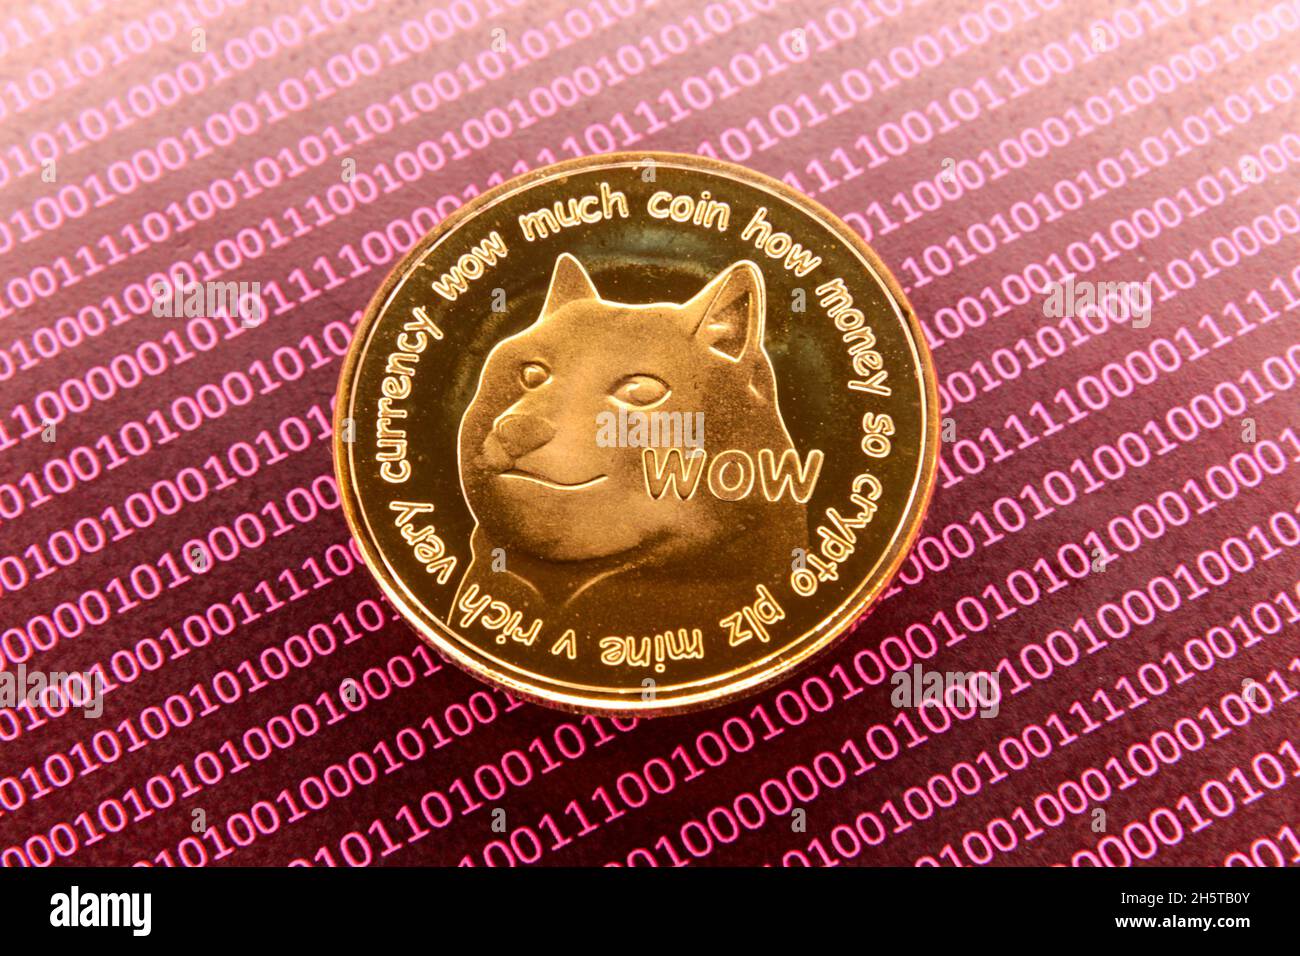 Dogecoin Doge coin digital crypto currency Stock Photo